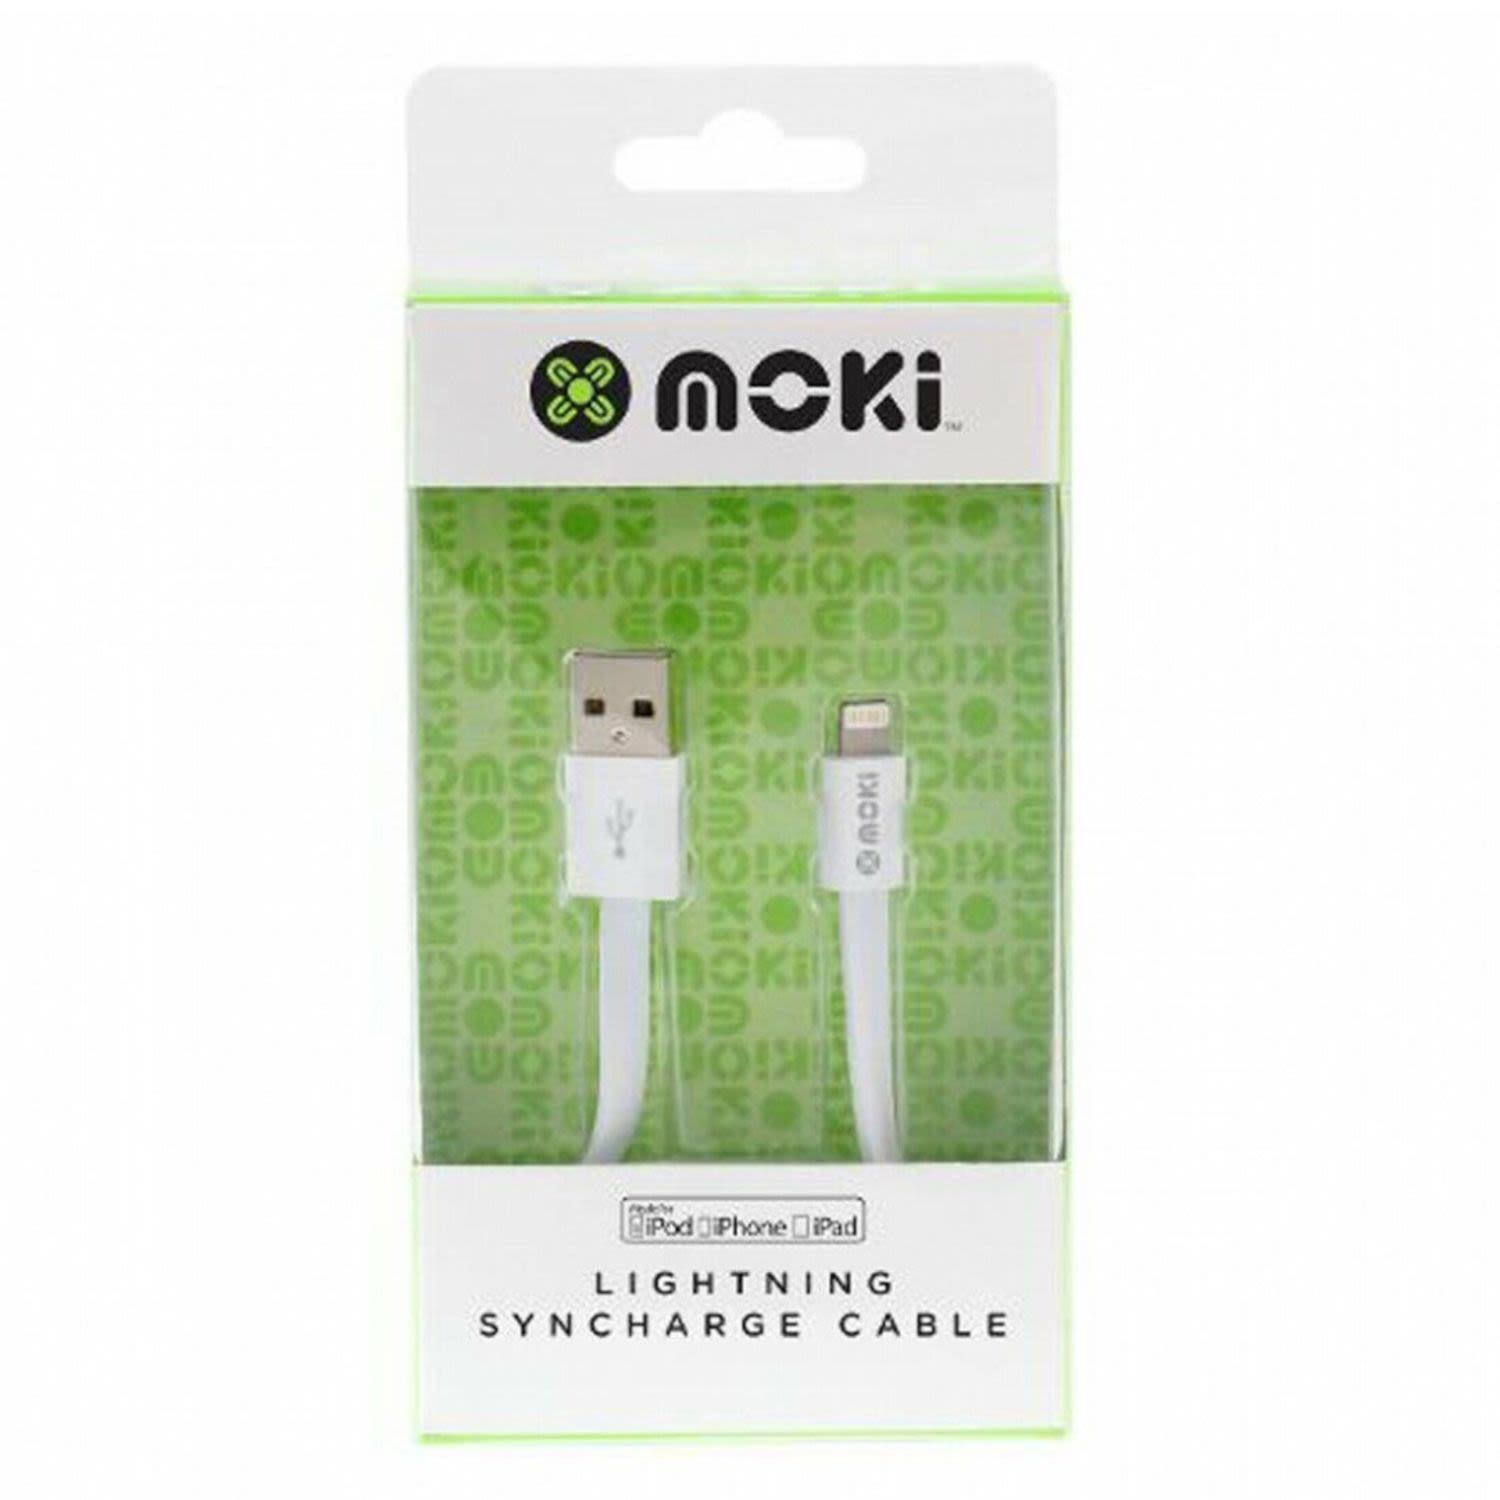 Moki Cable Lightning Syncharge, 1 Each